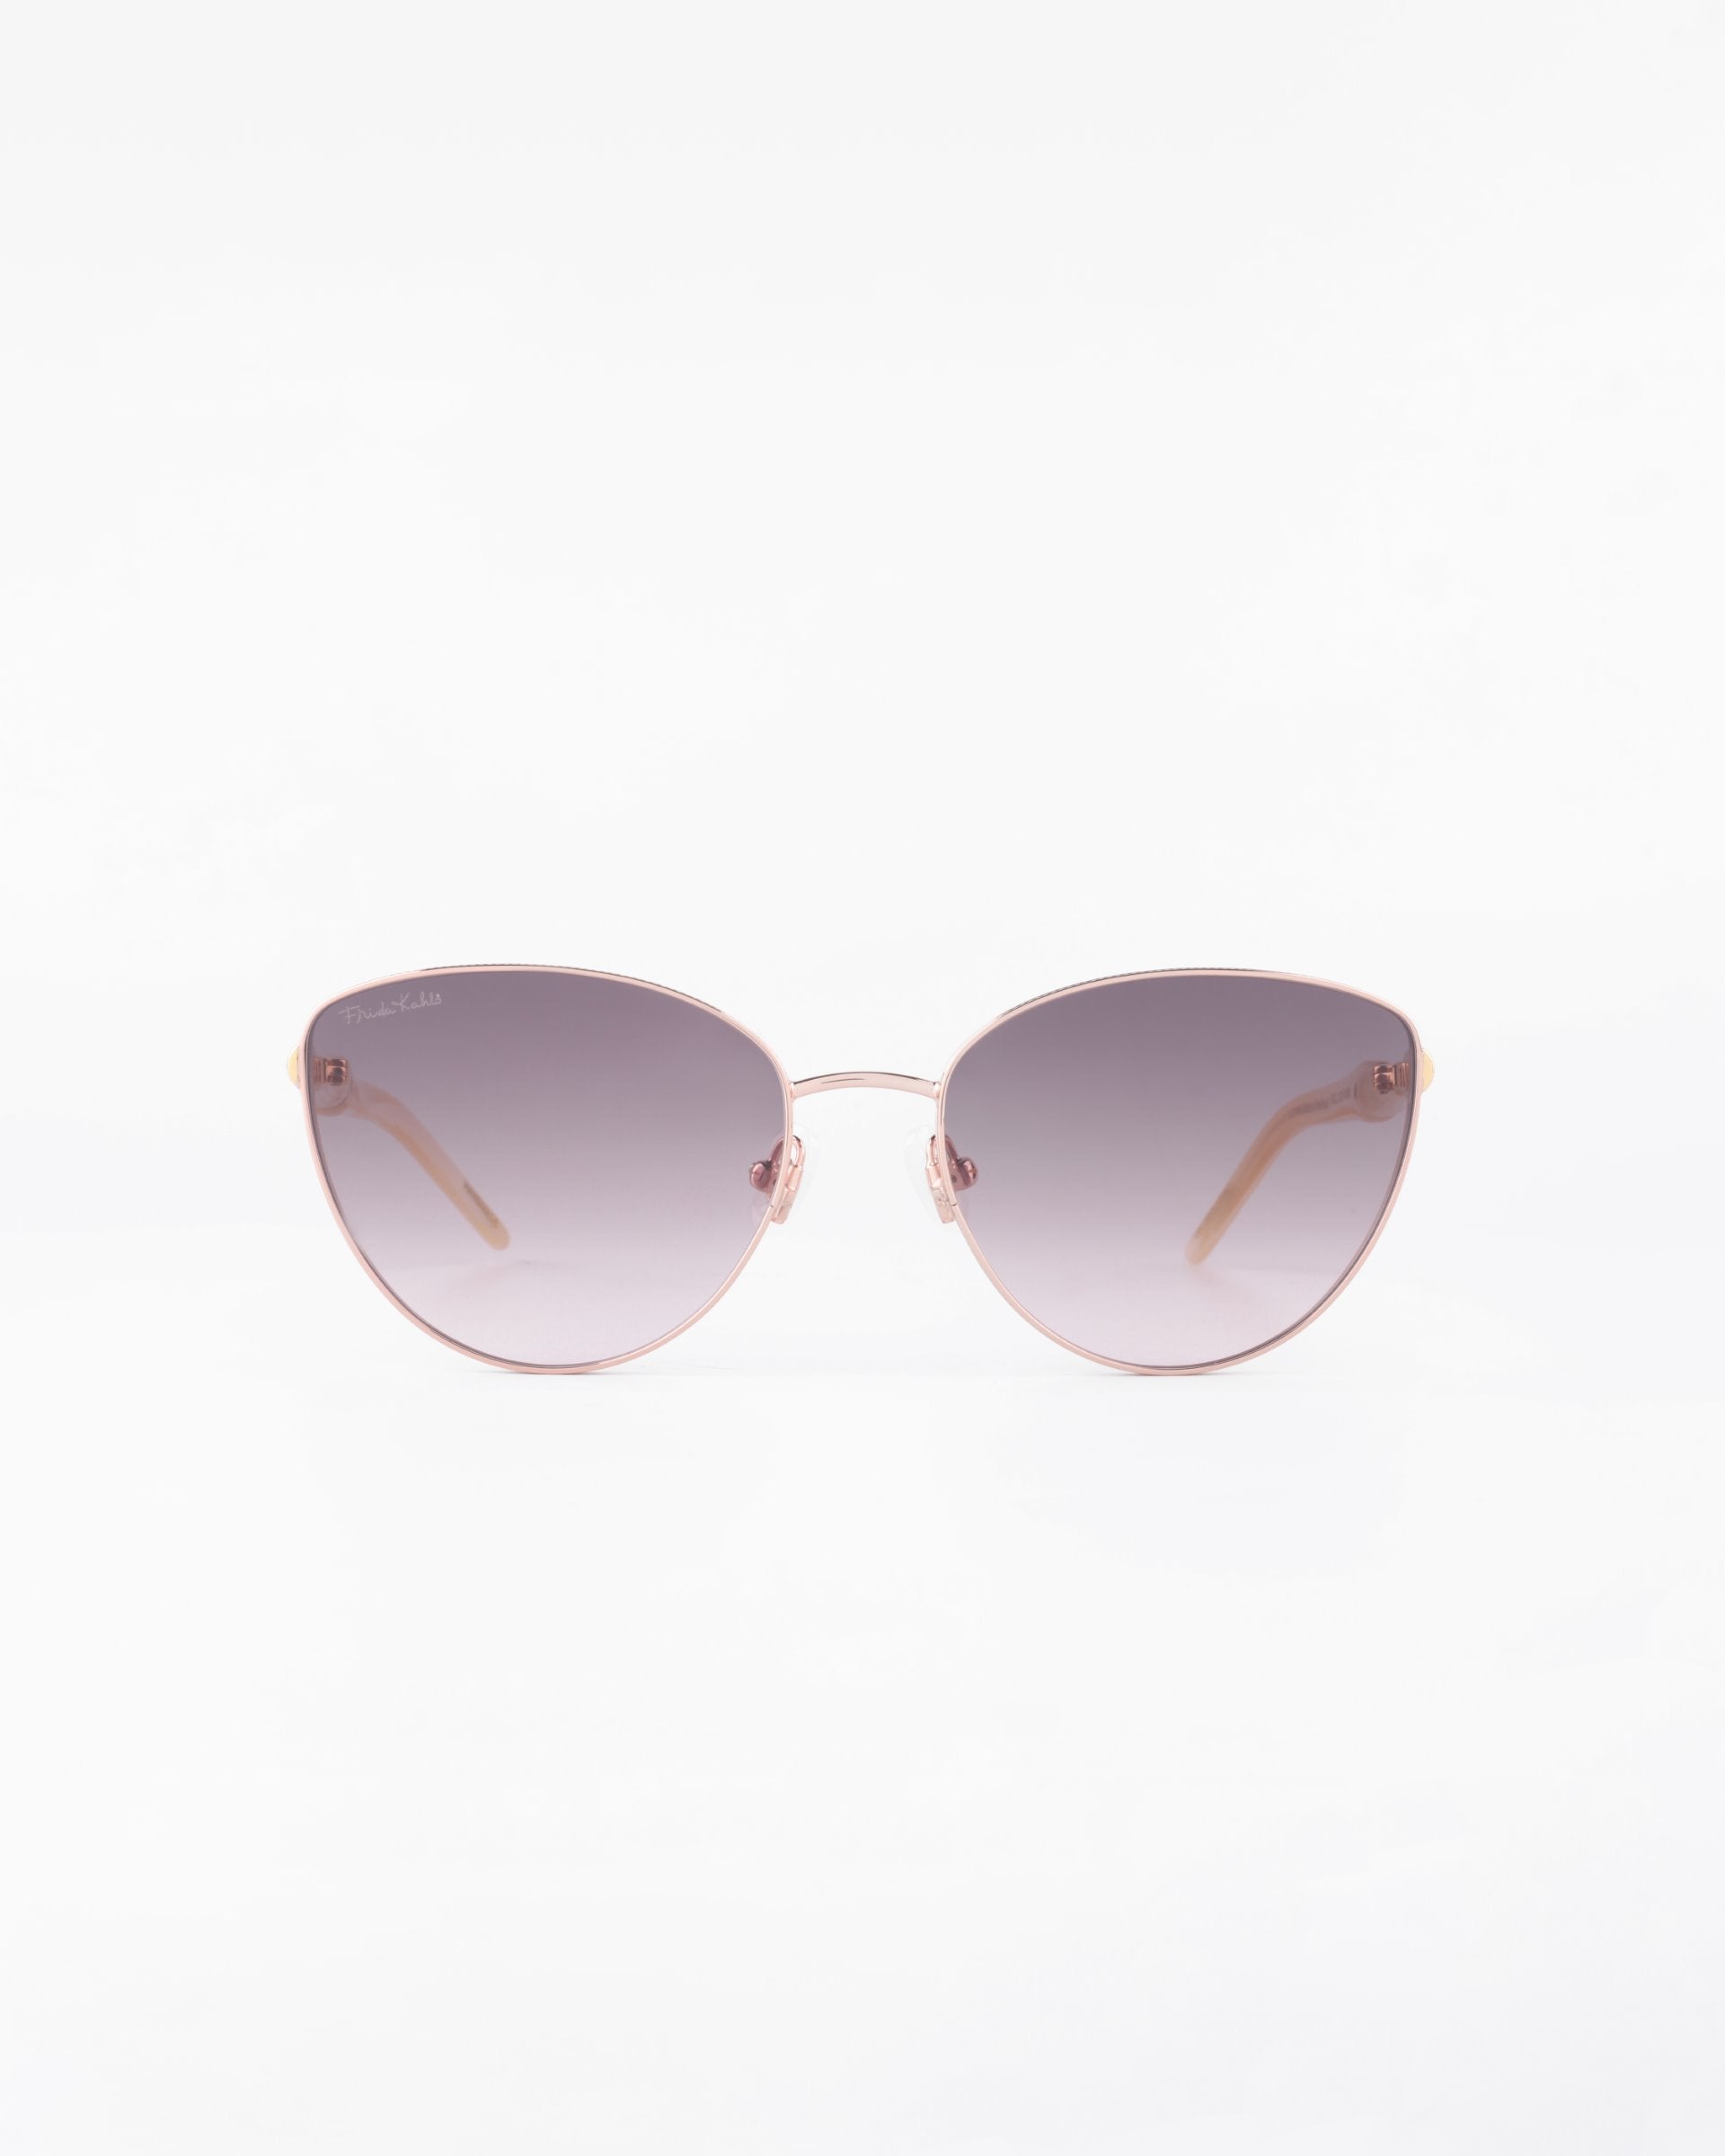 A pair of stylish Frida Brush sunglasses by For Art's Sake® with rose-gold frames and dark gradient, ultra-lightweight lenses. The arms, crafted from gold-plated stainless steel, are thin and elegant. Featuring UVA & UVB protection, these Frida Brush sunglasses create a modern look against a white background.